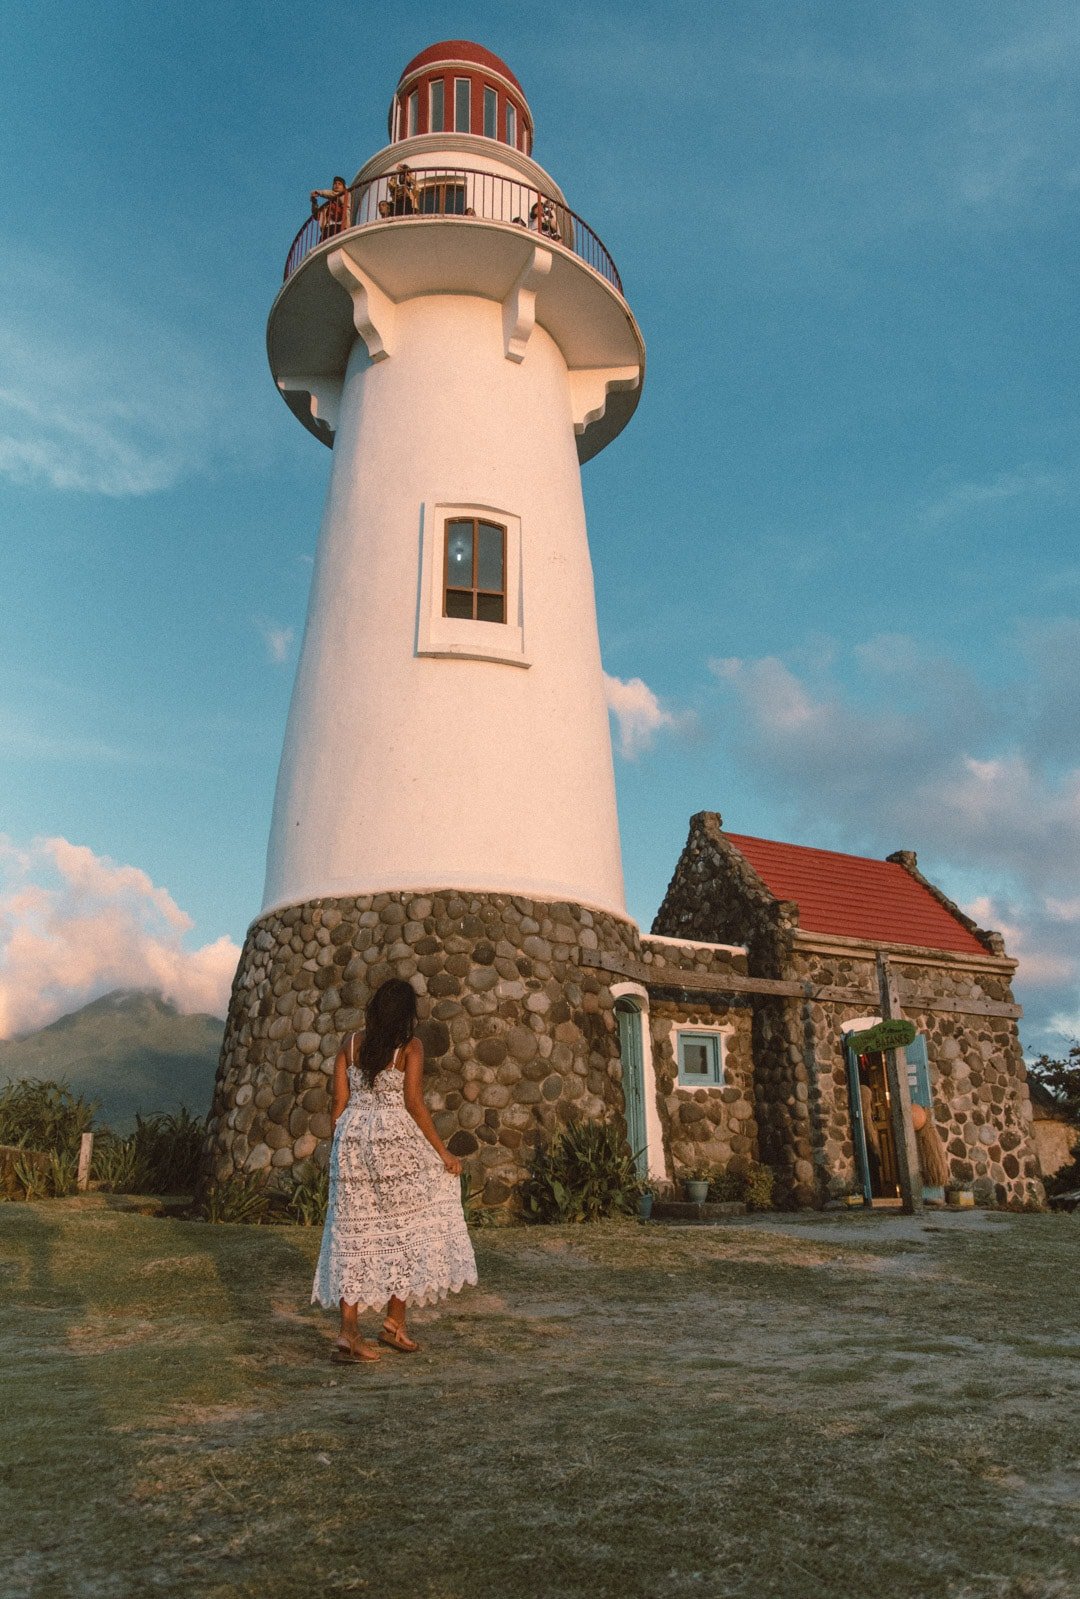 Basco Lighthouse, where to stay in batanes, batanes hotels, hotels in batanes